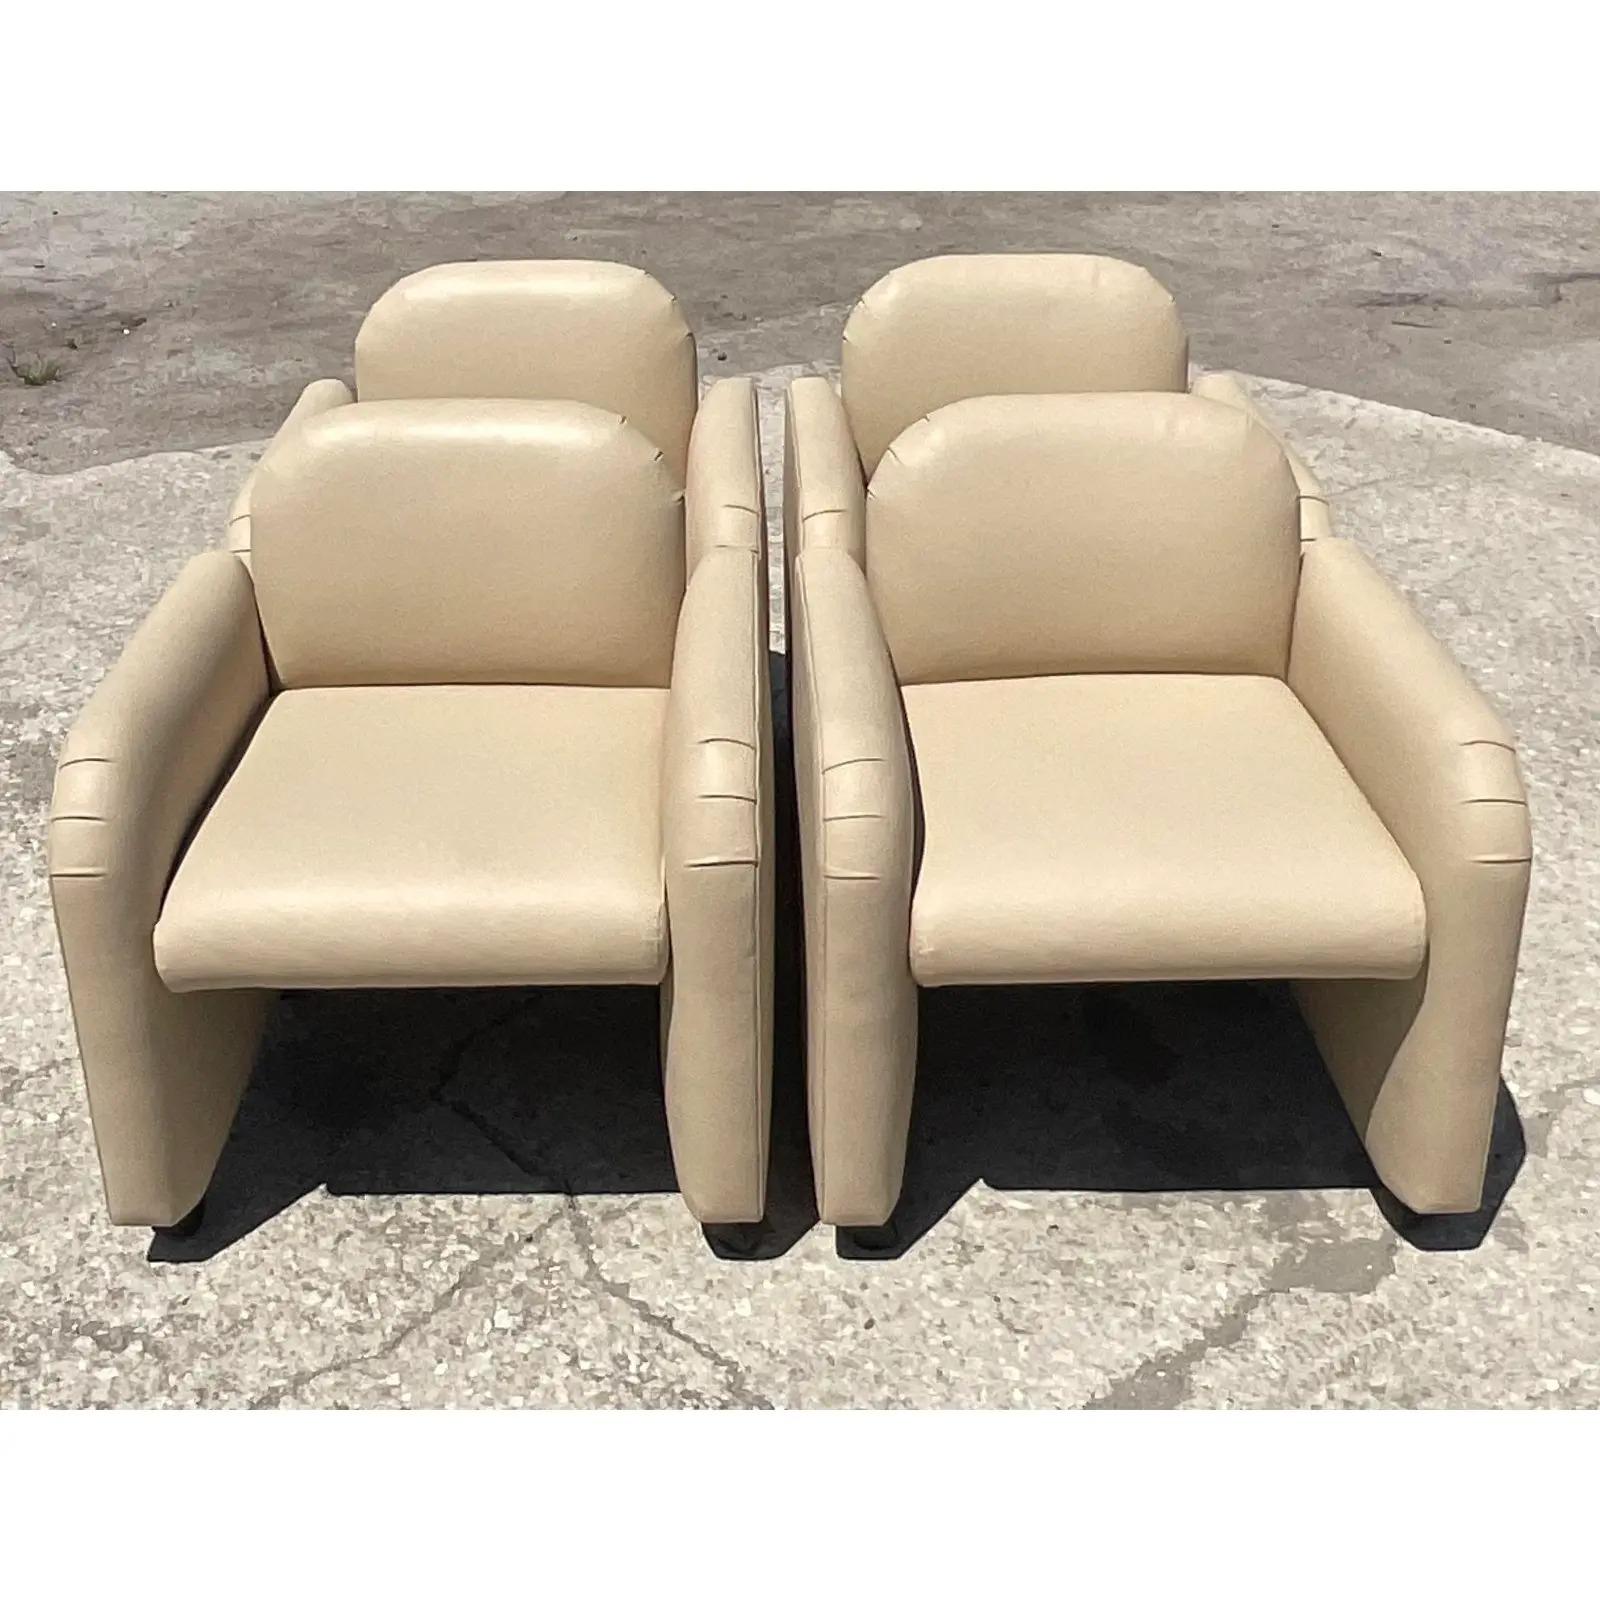 20th Century Vintage Contemporary Leather Lounge Chairs on Casters, Set of 4